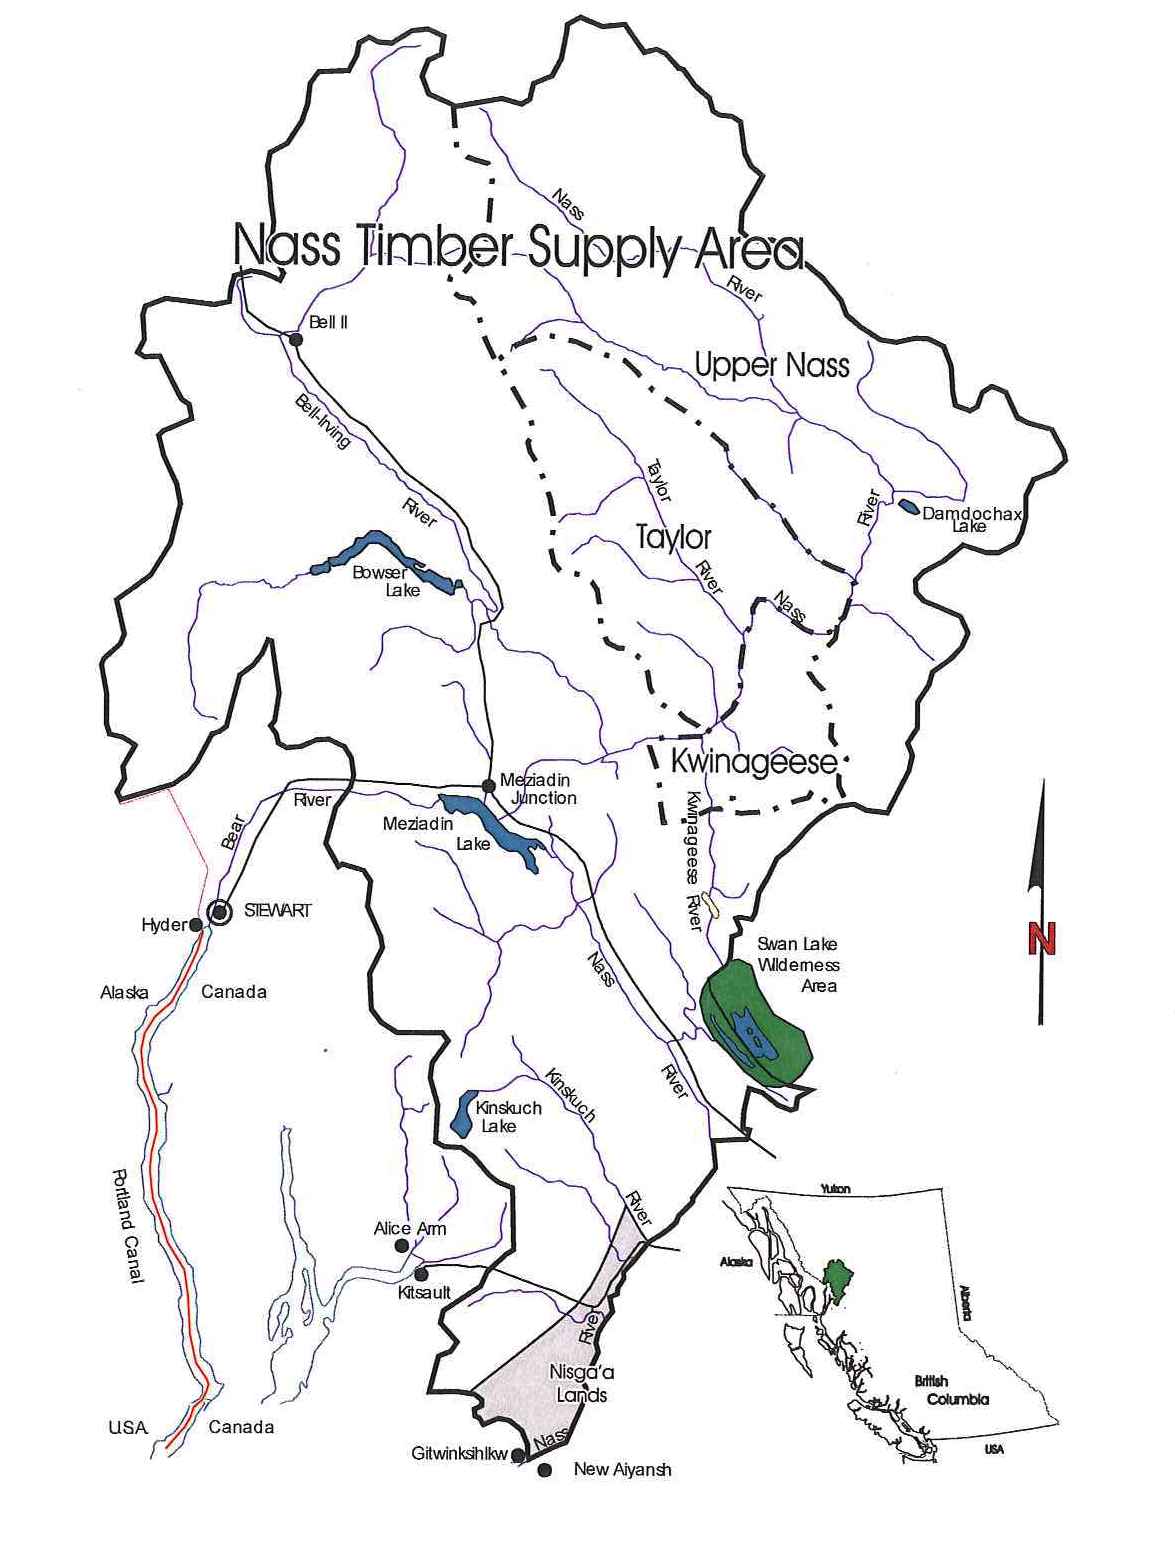 map of Nass Timber Supply Area, click to expand